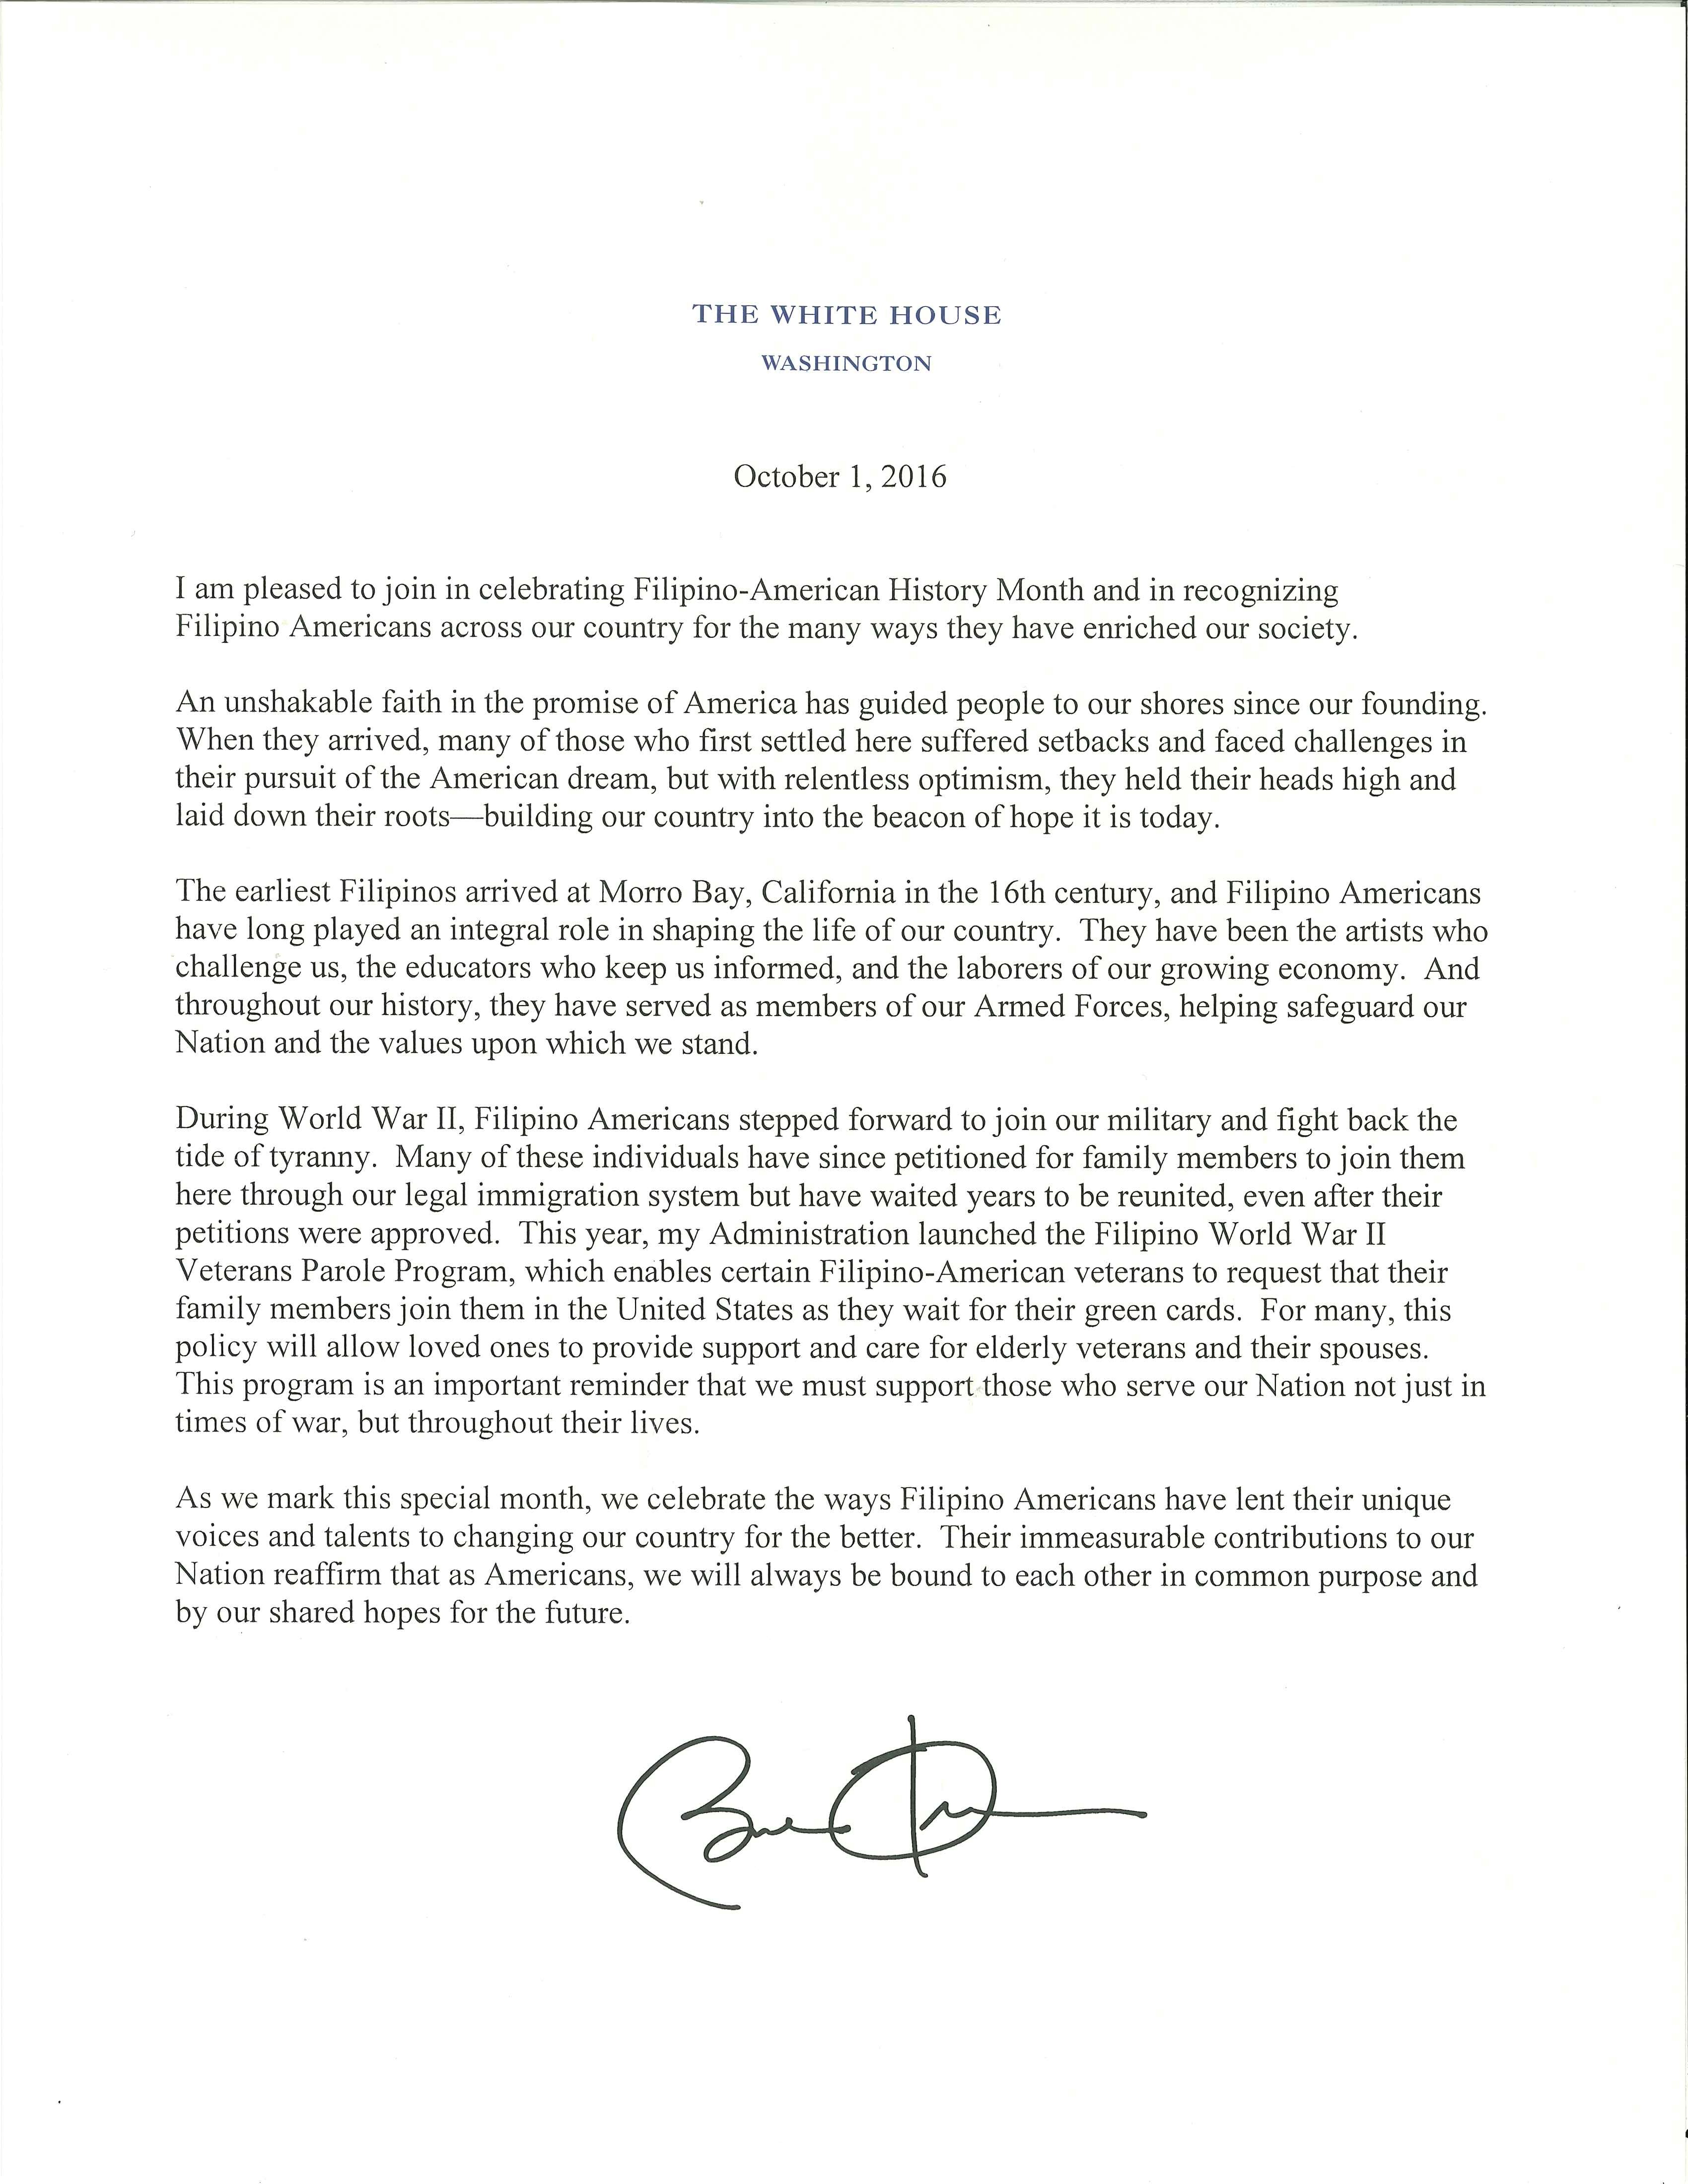 President's Message on Filpino American History Month